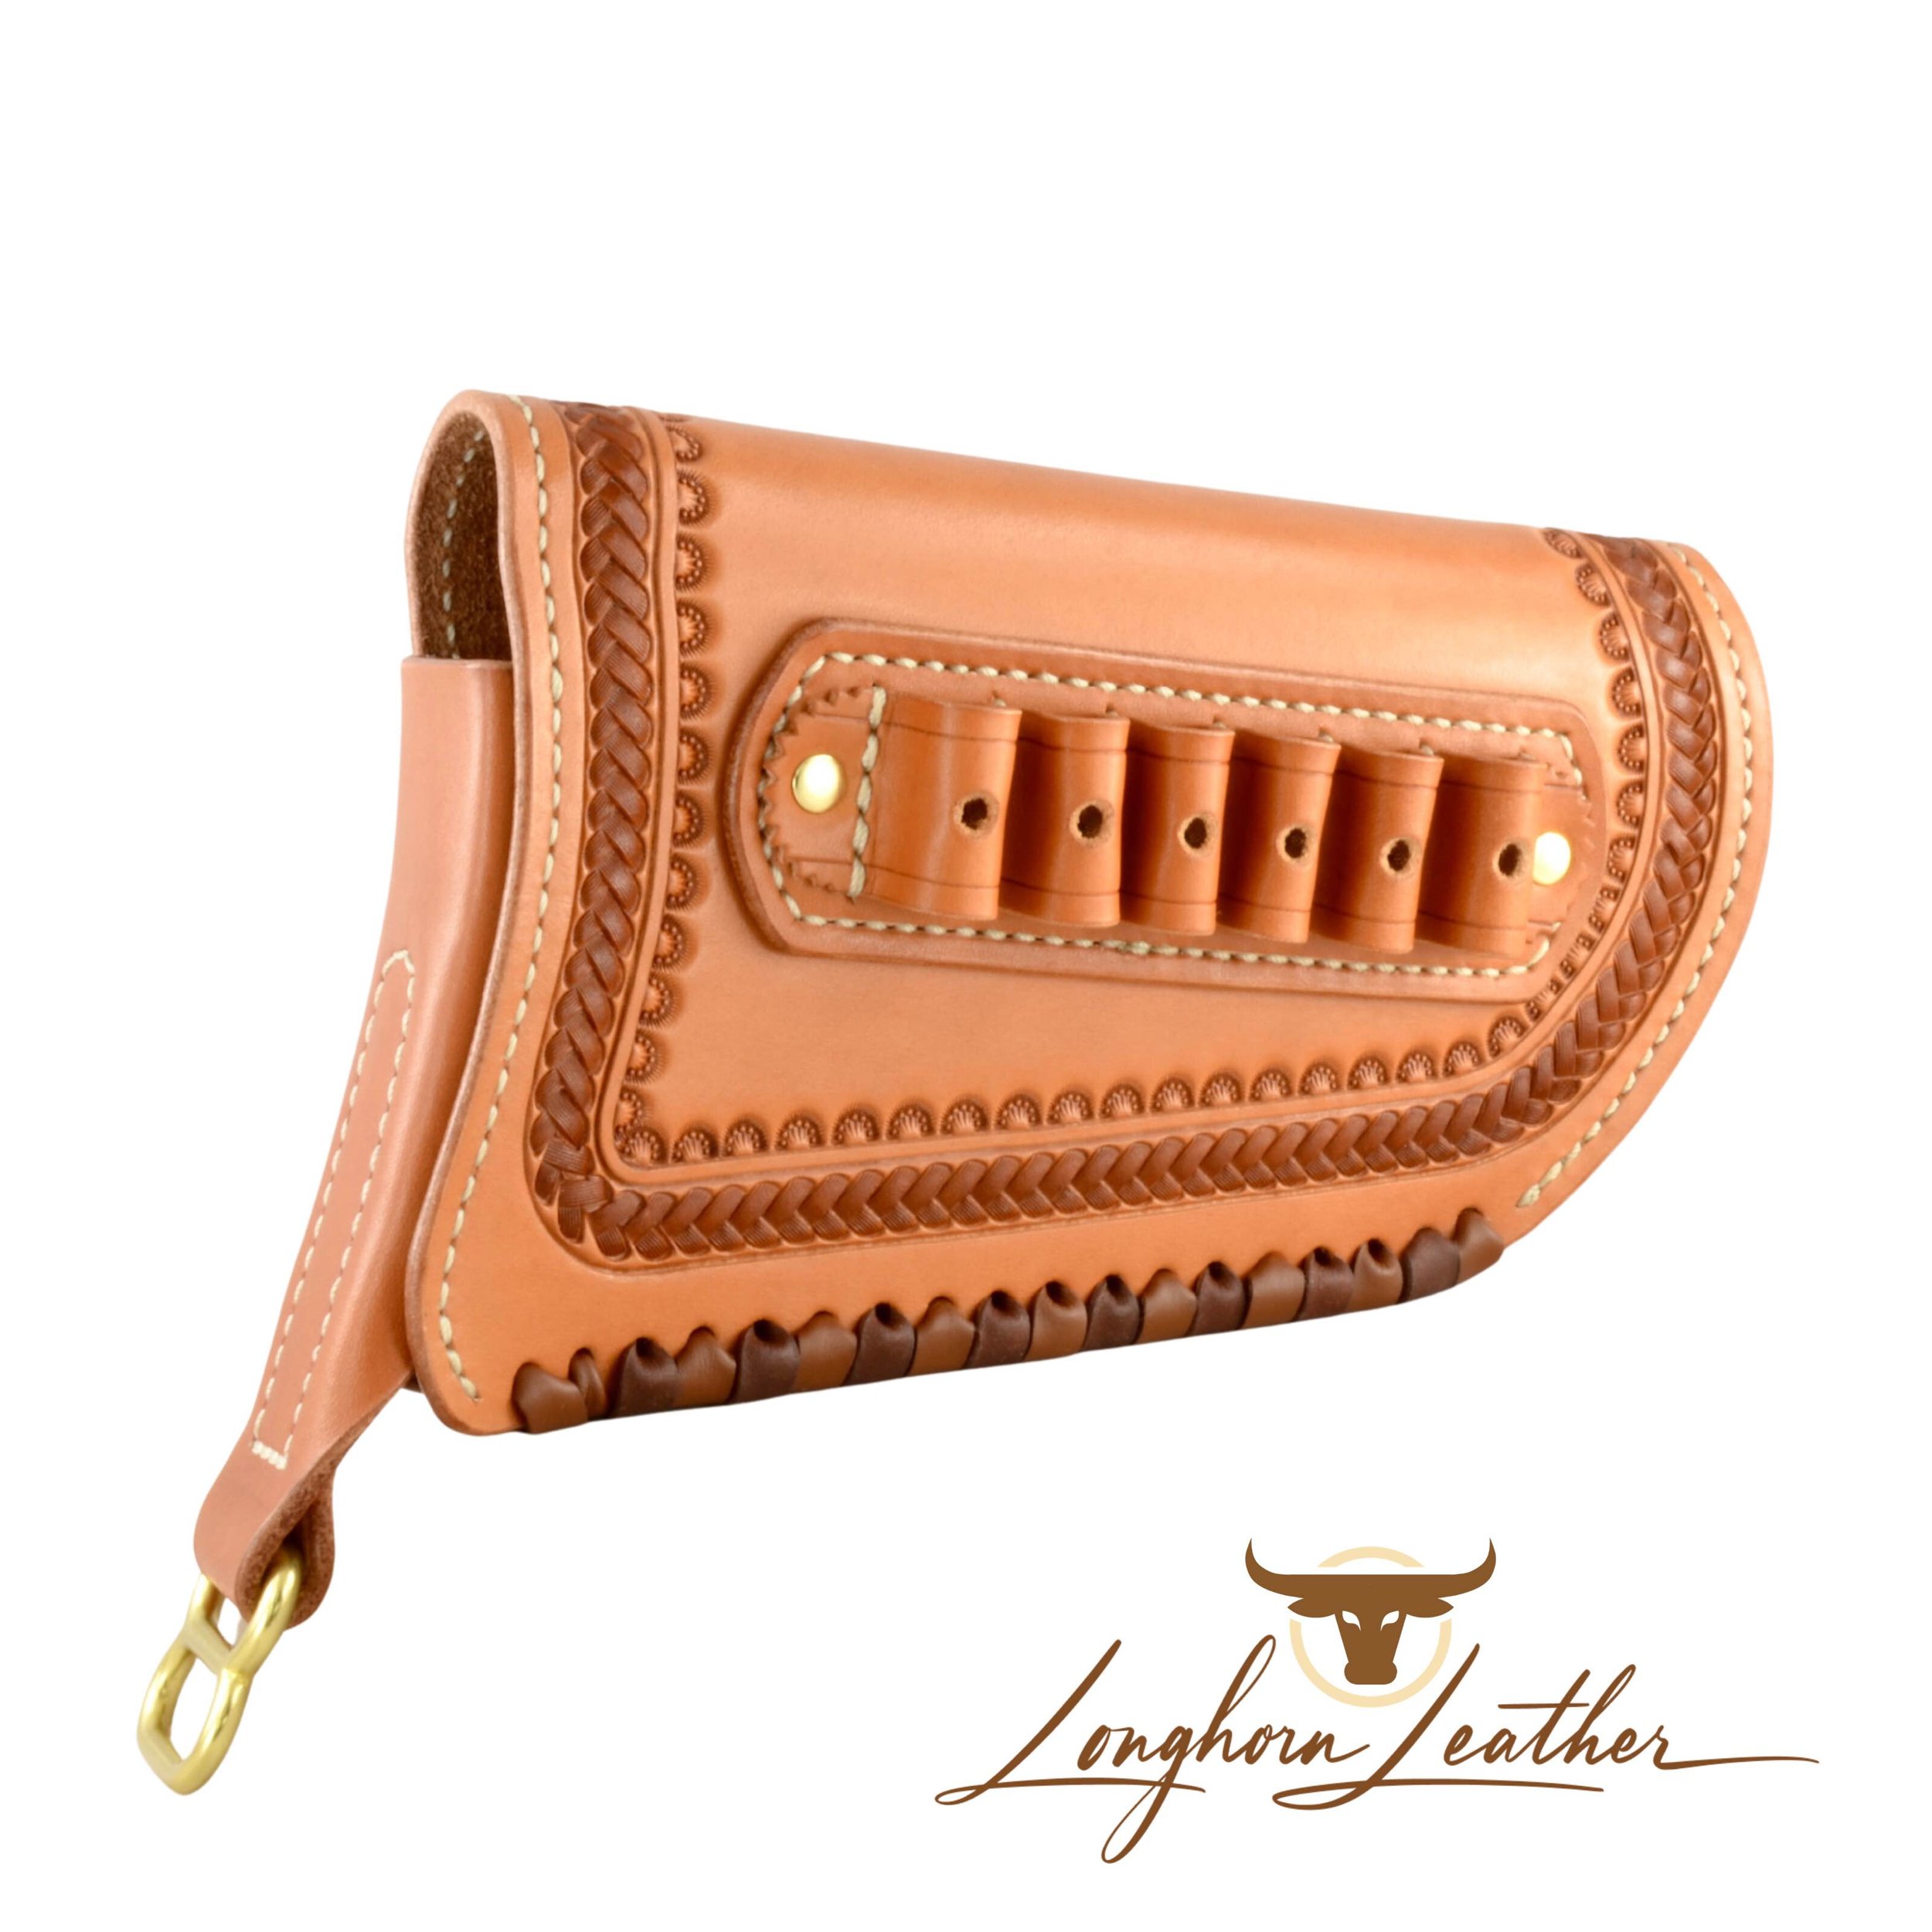 Custom leather gunstock cover featuring the Sedona design. Individually handcrafted at Longhorn Leather AZ